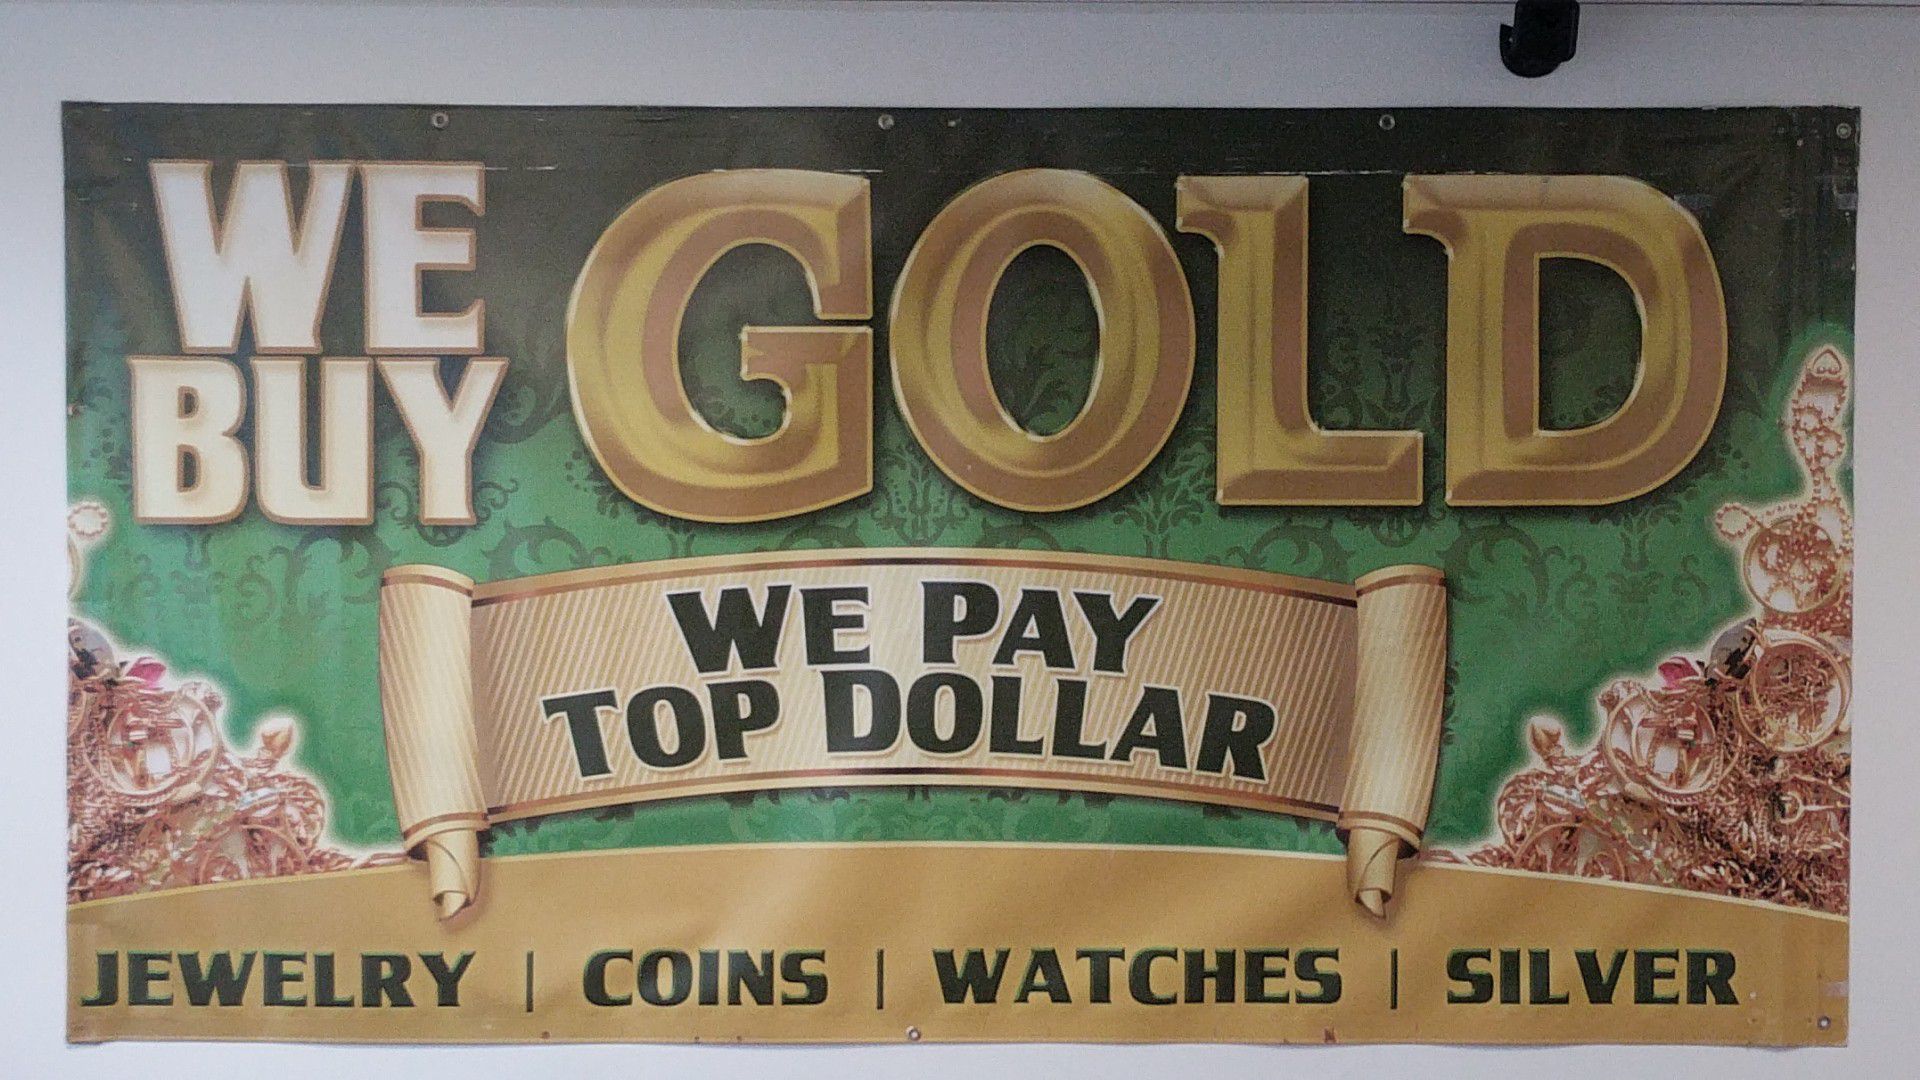 Indy gold and silver buyers. 6053 east Washington St